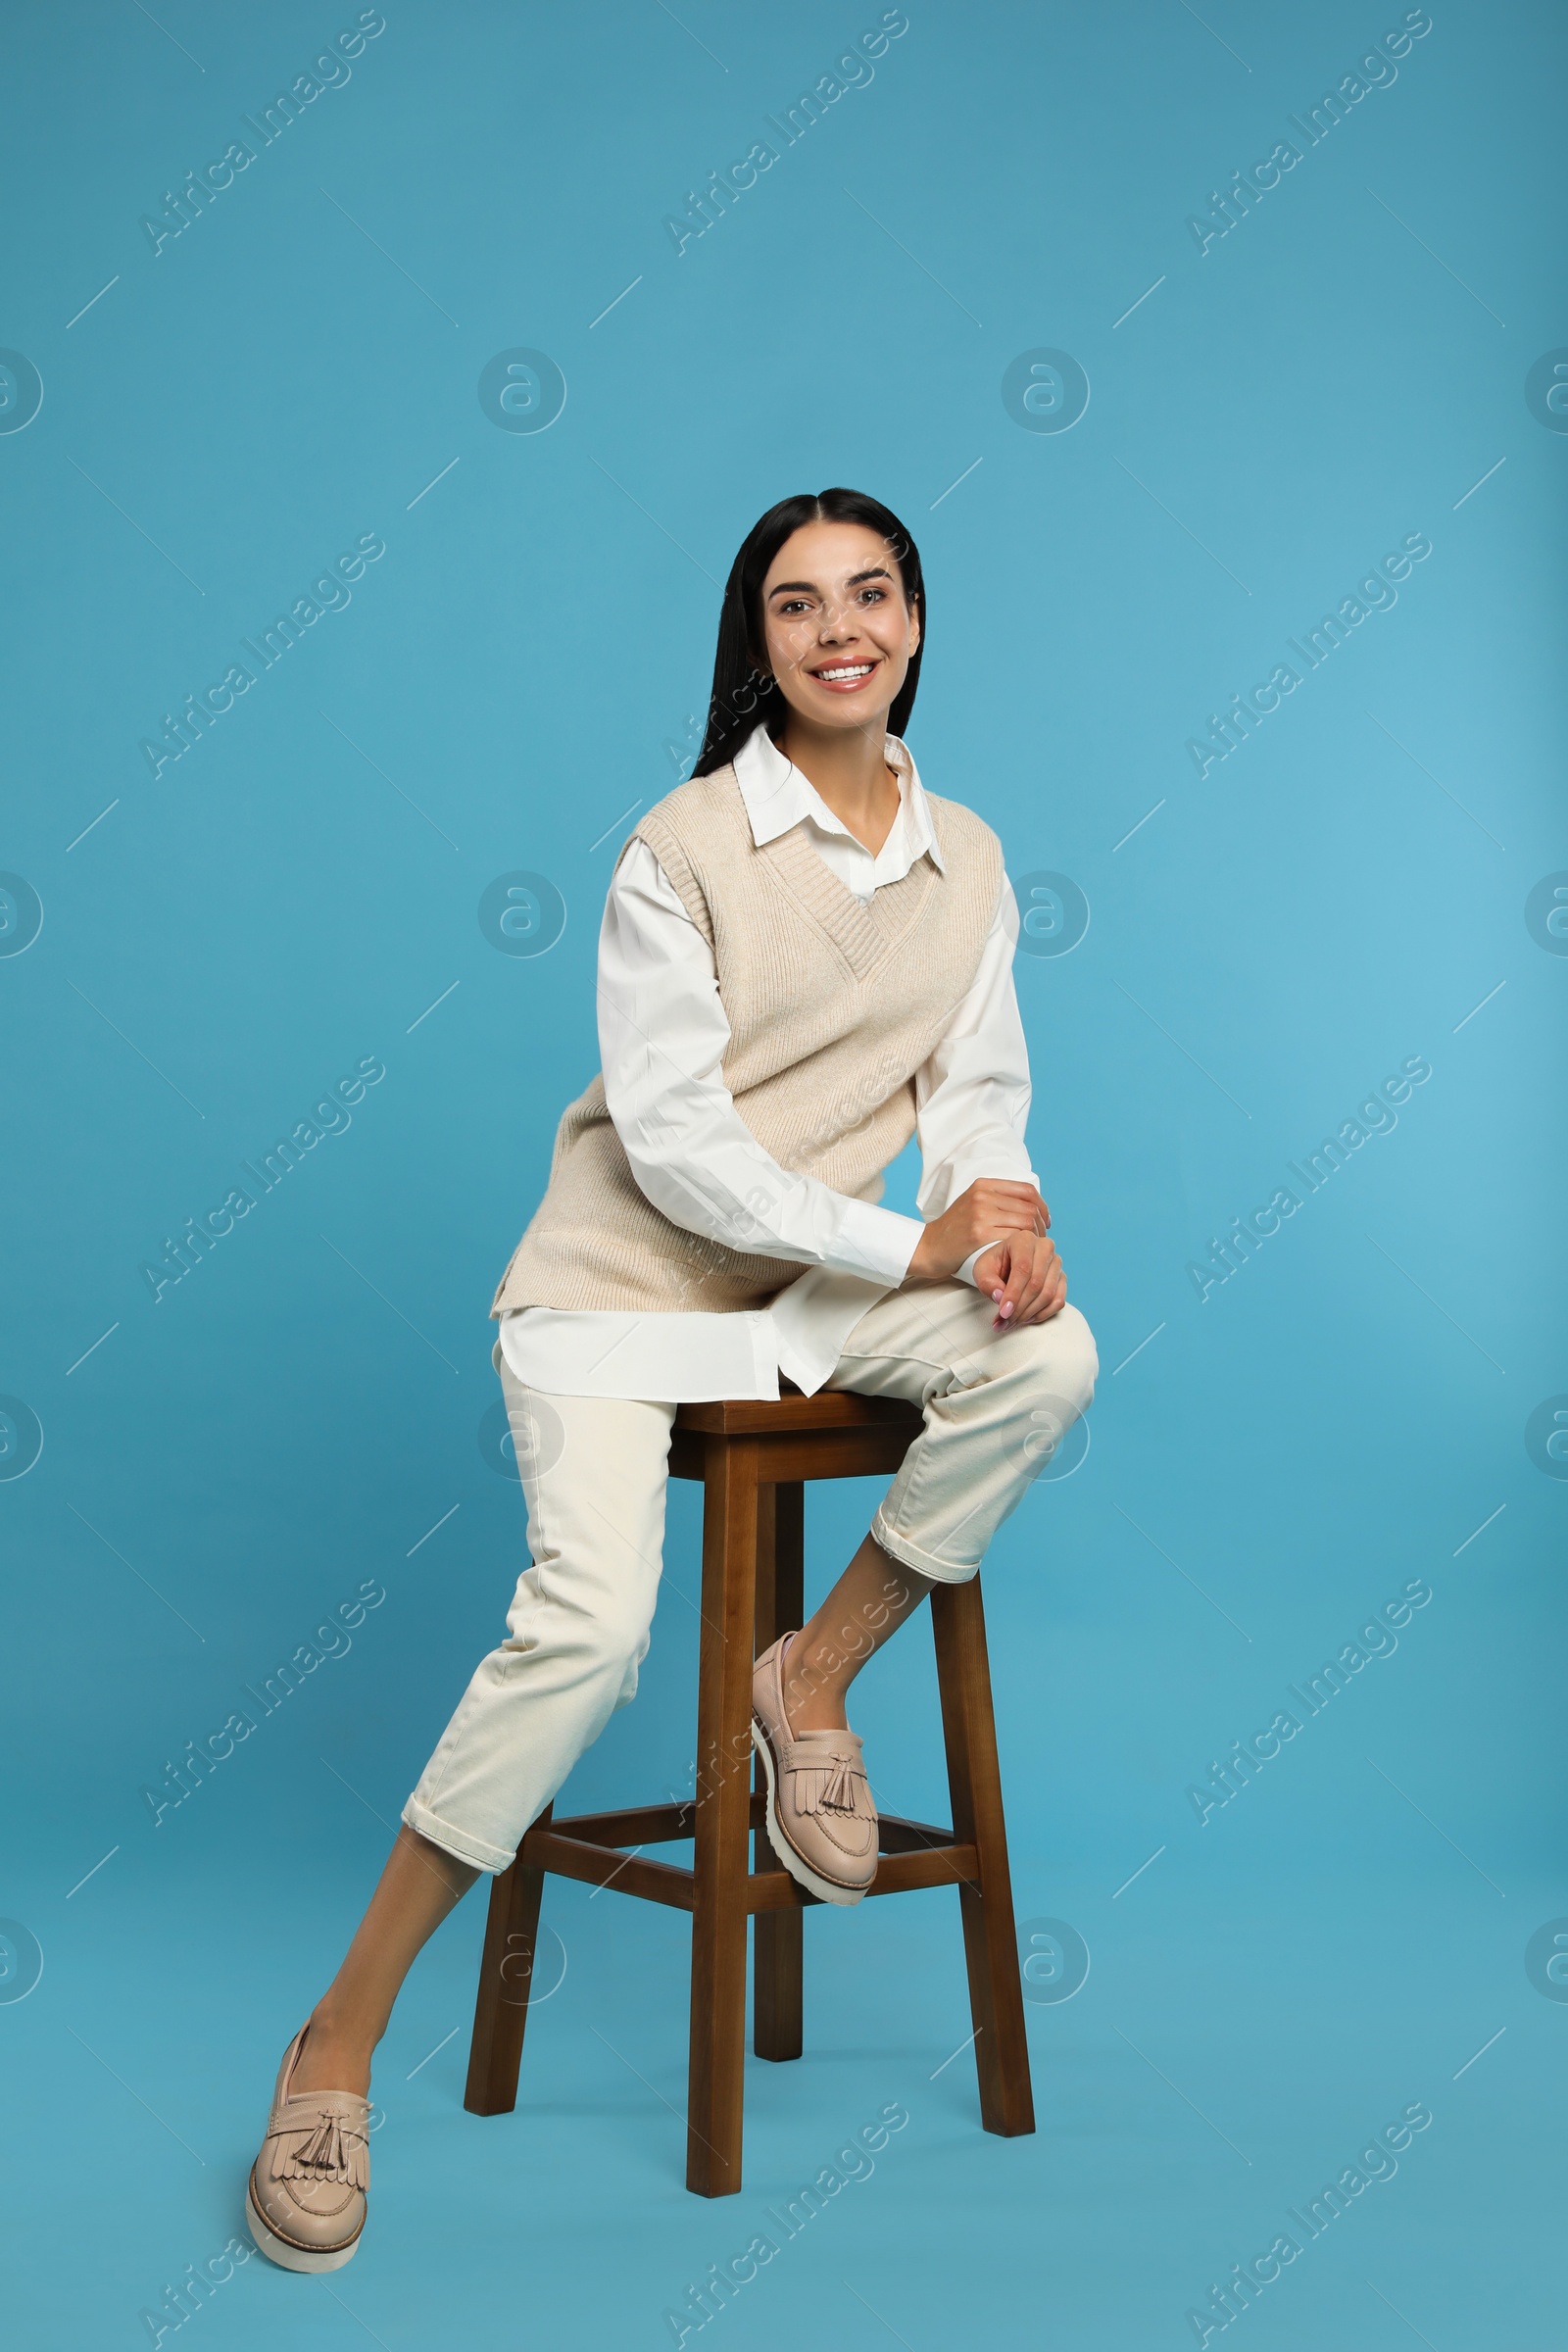 Photo of Beautiful young woman sitting on stool against turquoise background